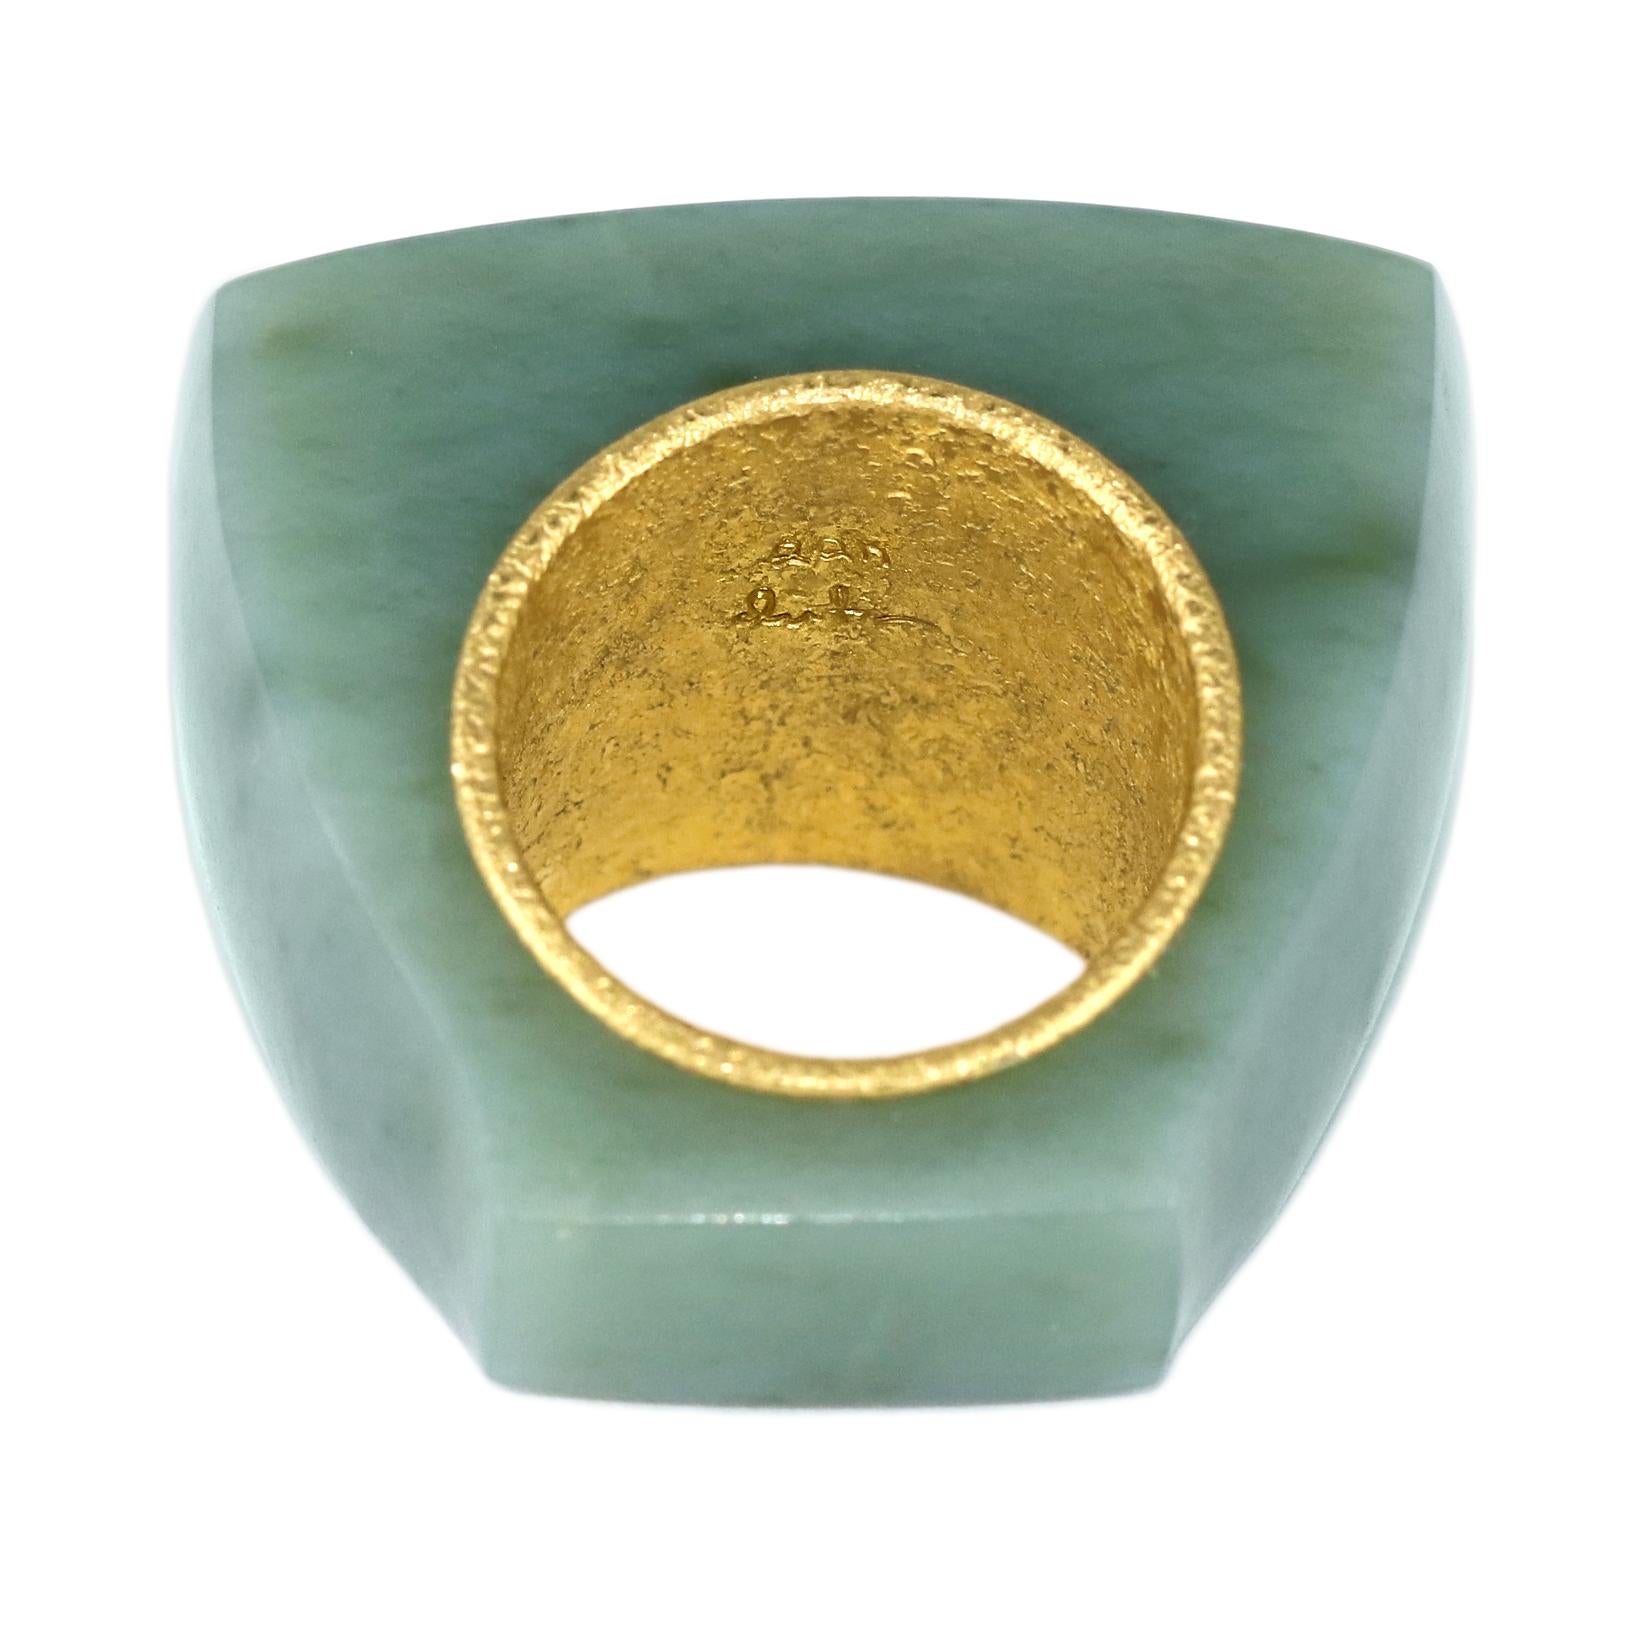 Tumbled Devta Doolan Hand Carved New Zealand Jade One of a Kind Golden Sleeve Ring